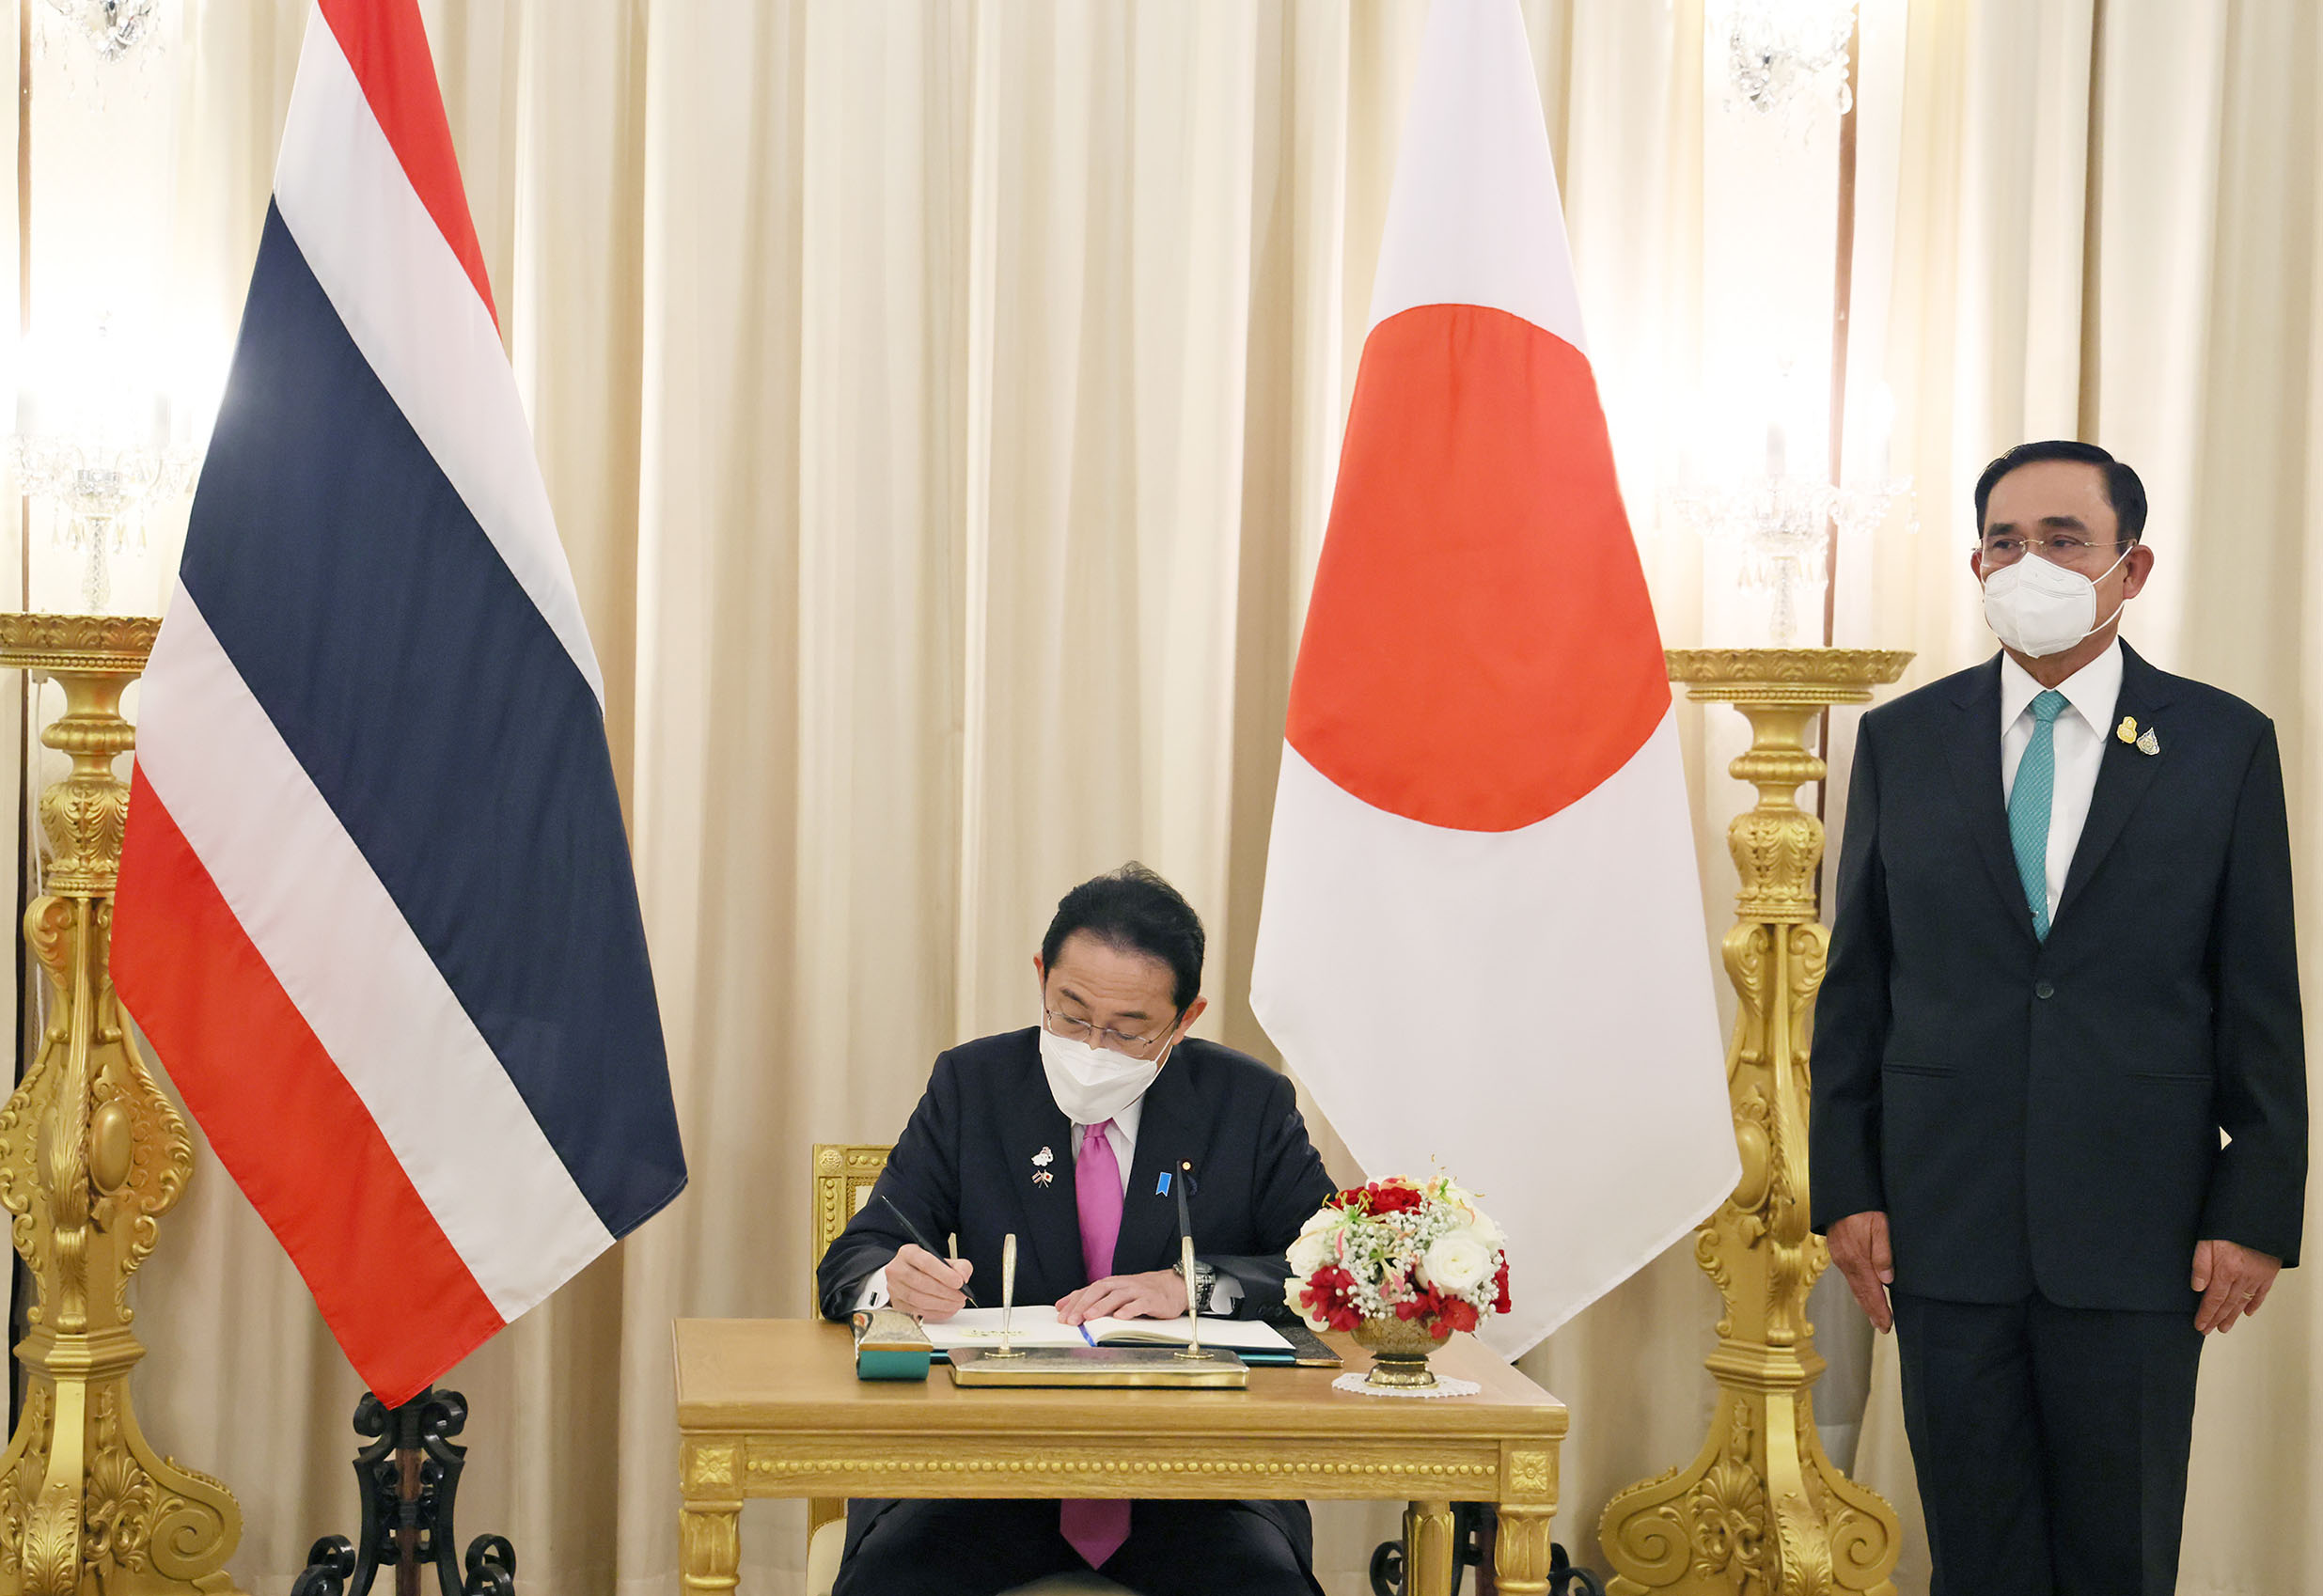 Photograph of the Prime Minister signing a visitors’ book